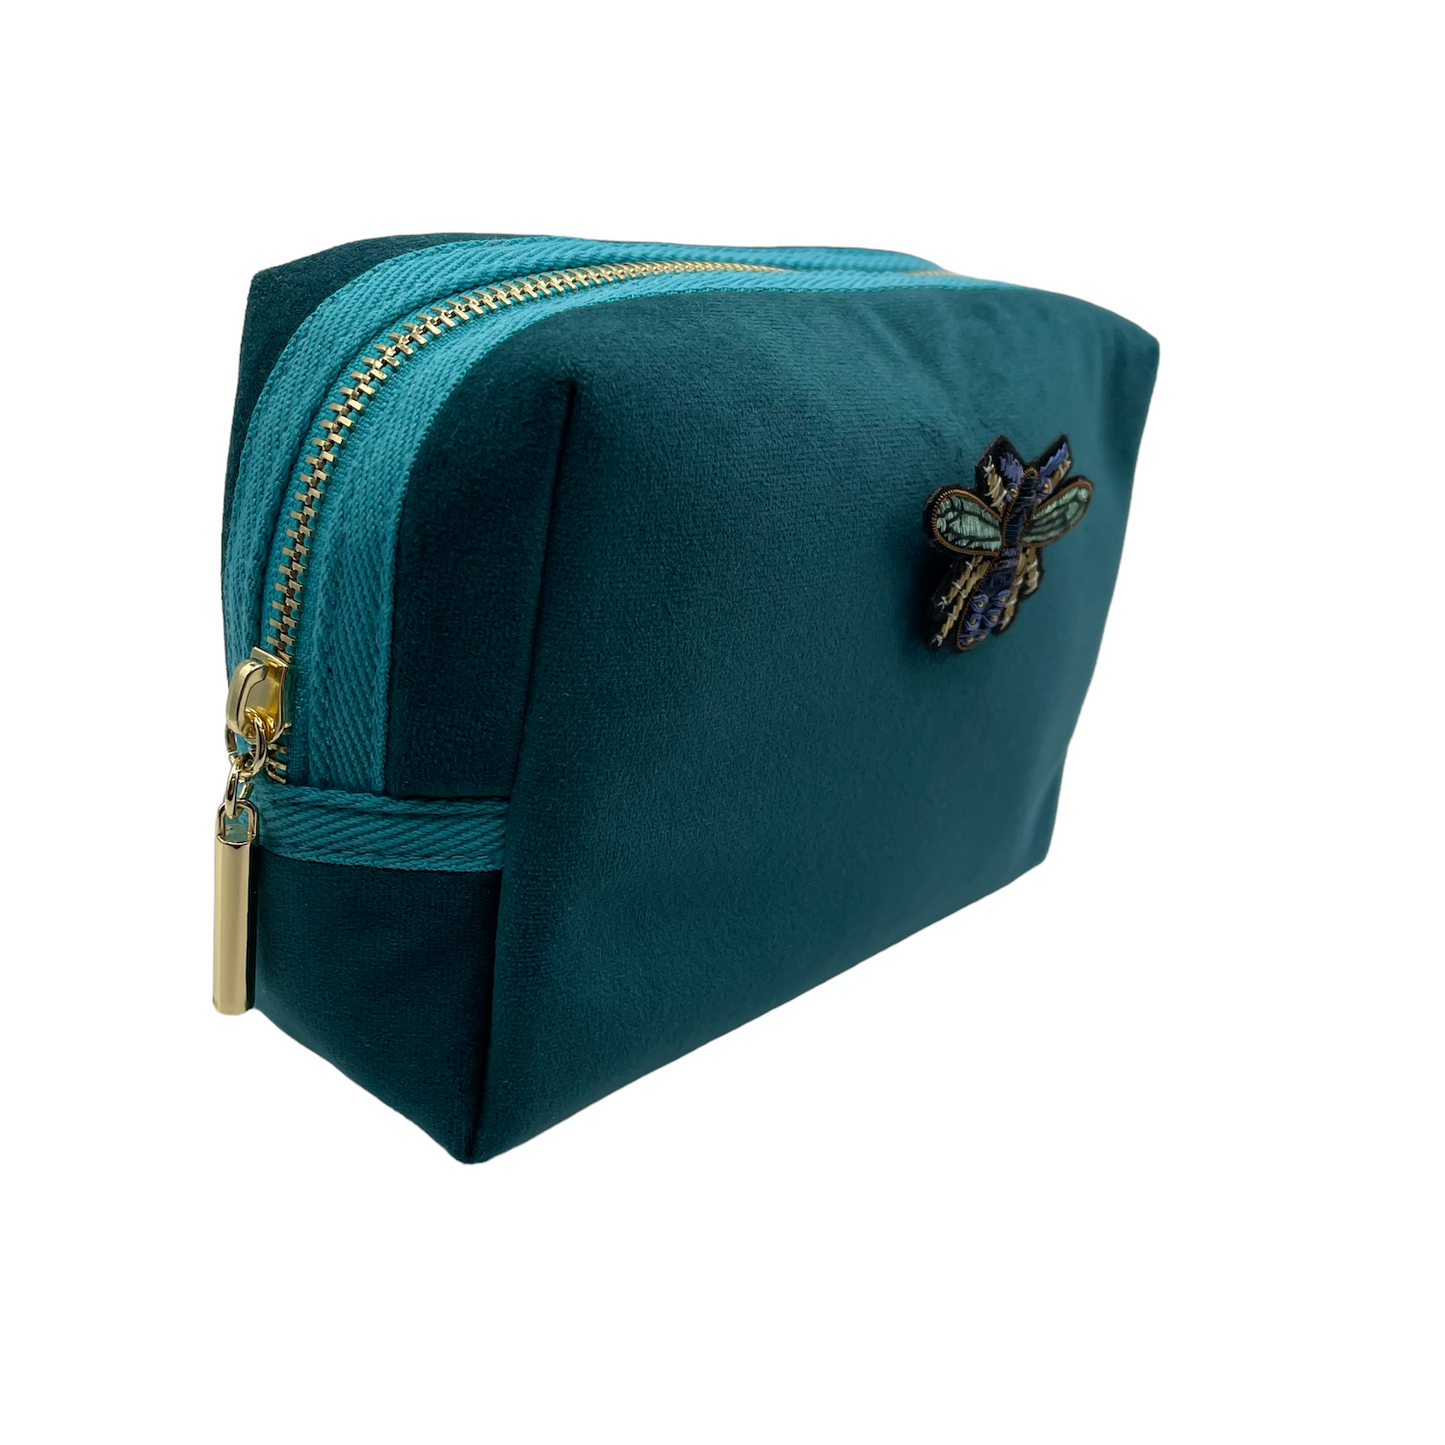 Teal make-up bag & petite insect pin - recycled velvet